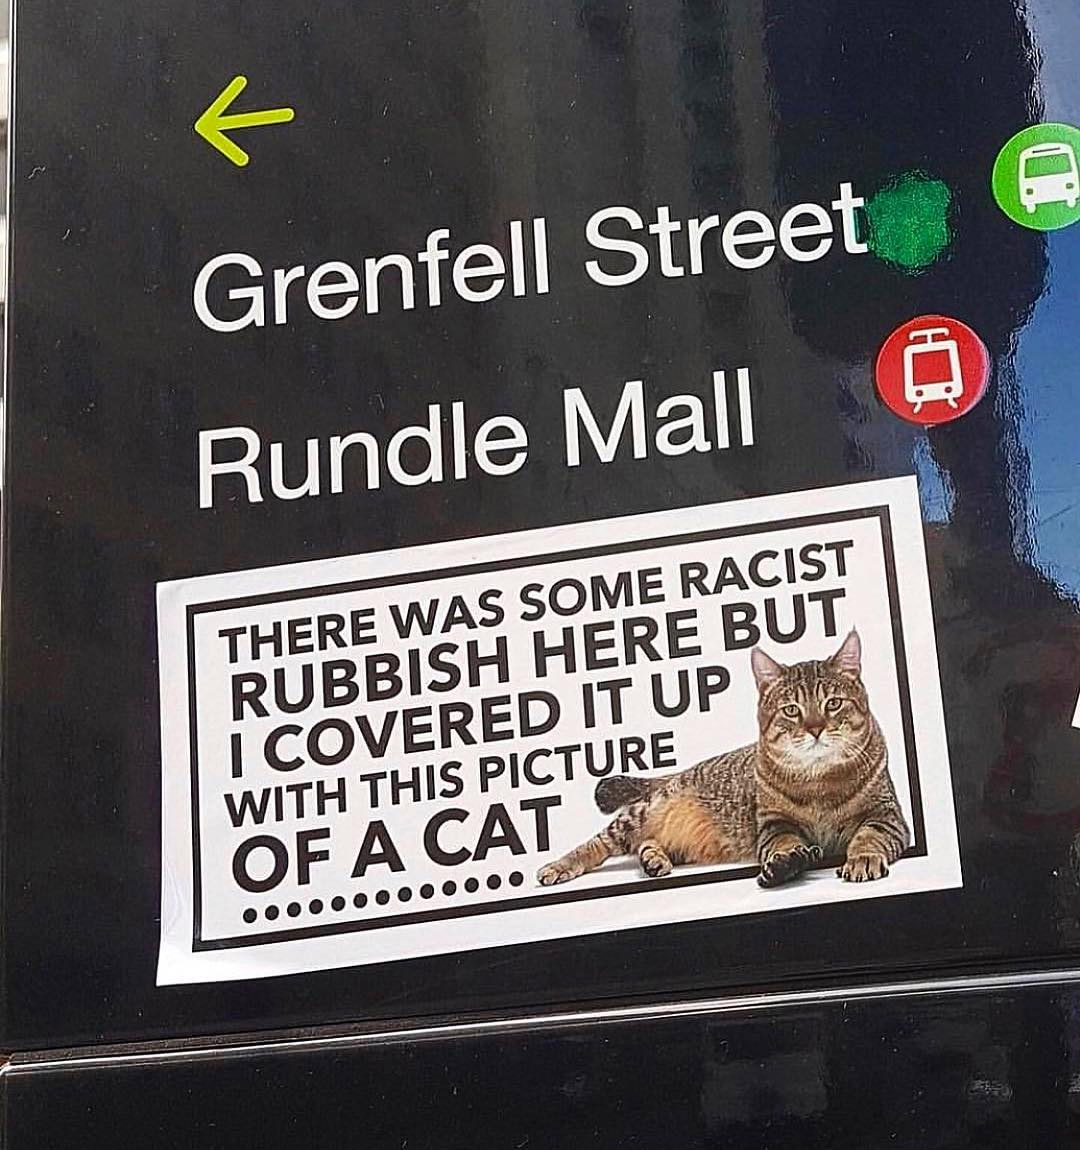 Giant Cat Sticker To Cover Up Racist Graffiti On The Streets - Manchester cat stickers